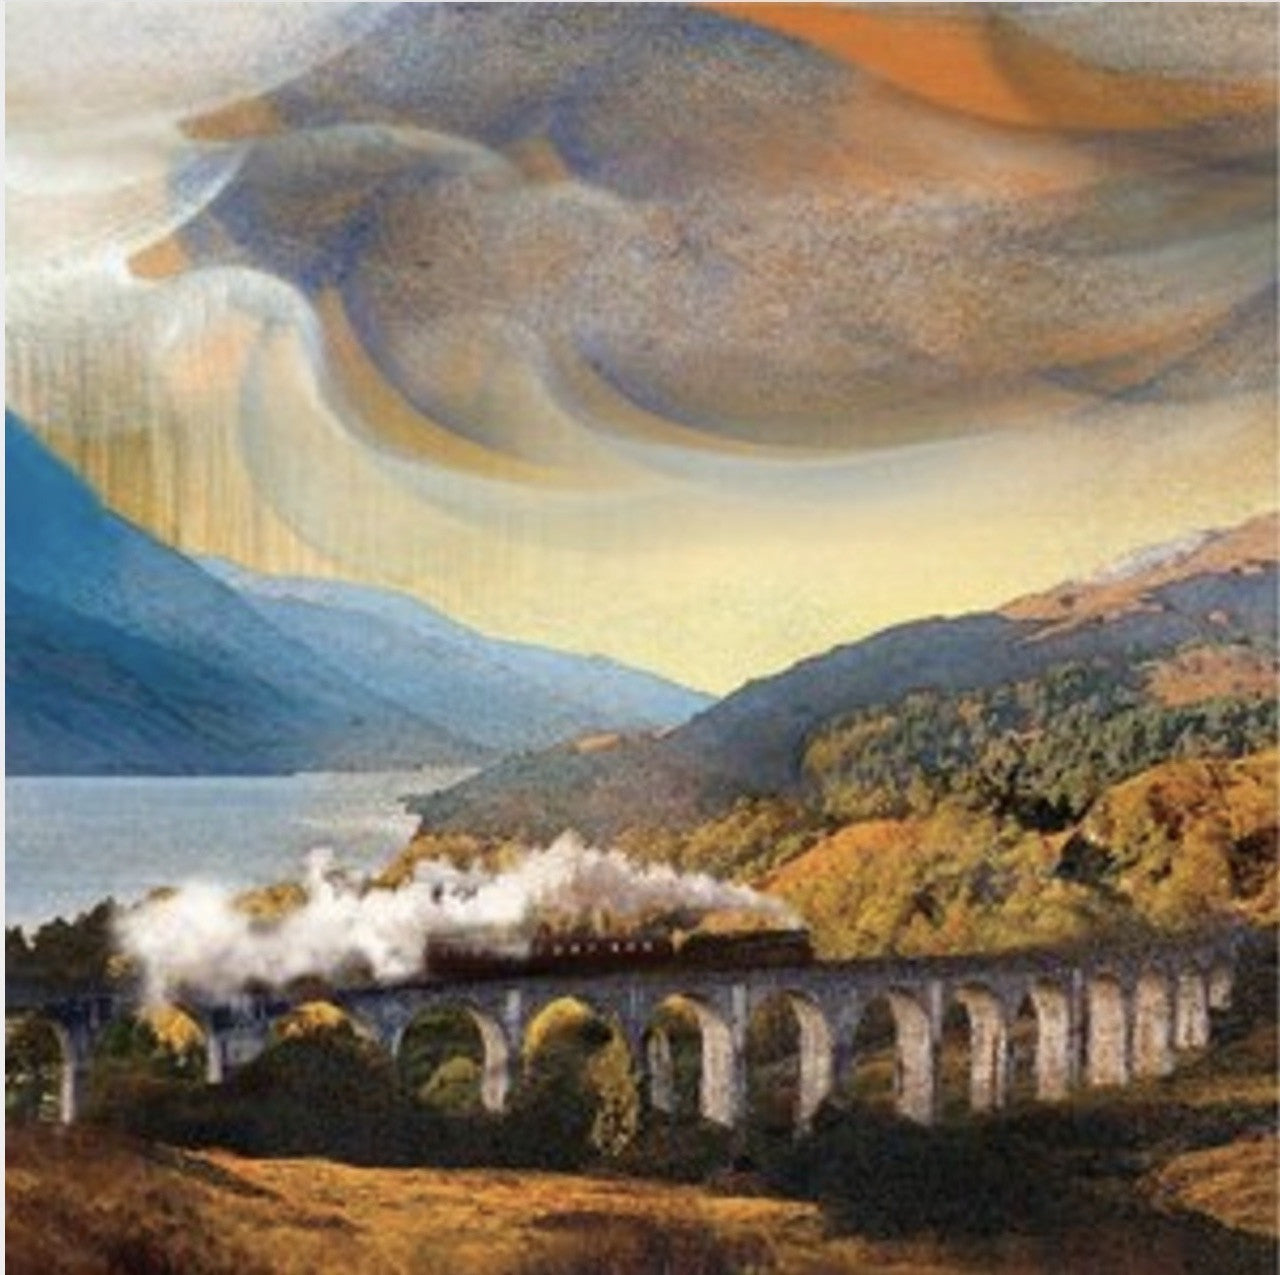 Glenfinnan Viaduct by Esther Cohen - Petite